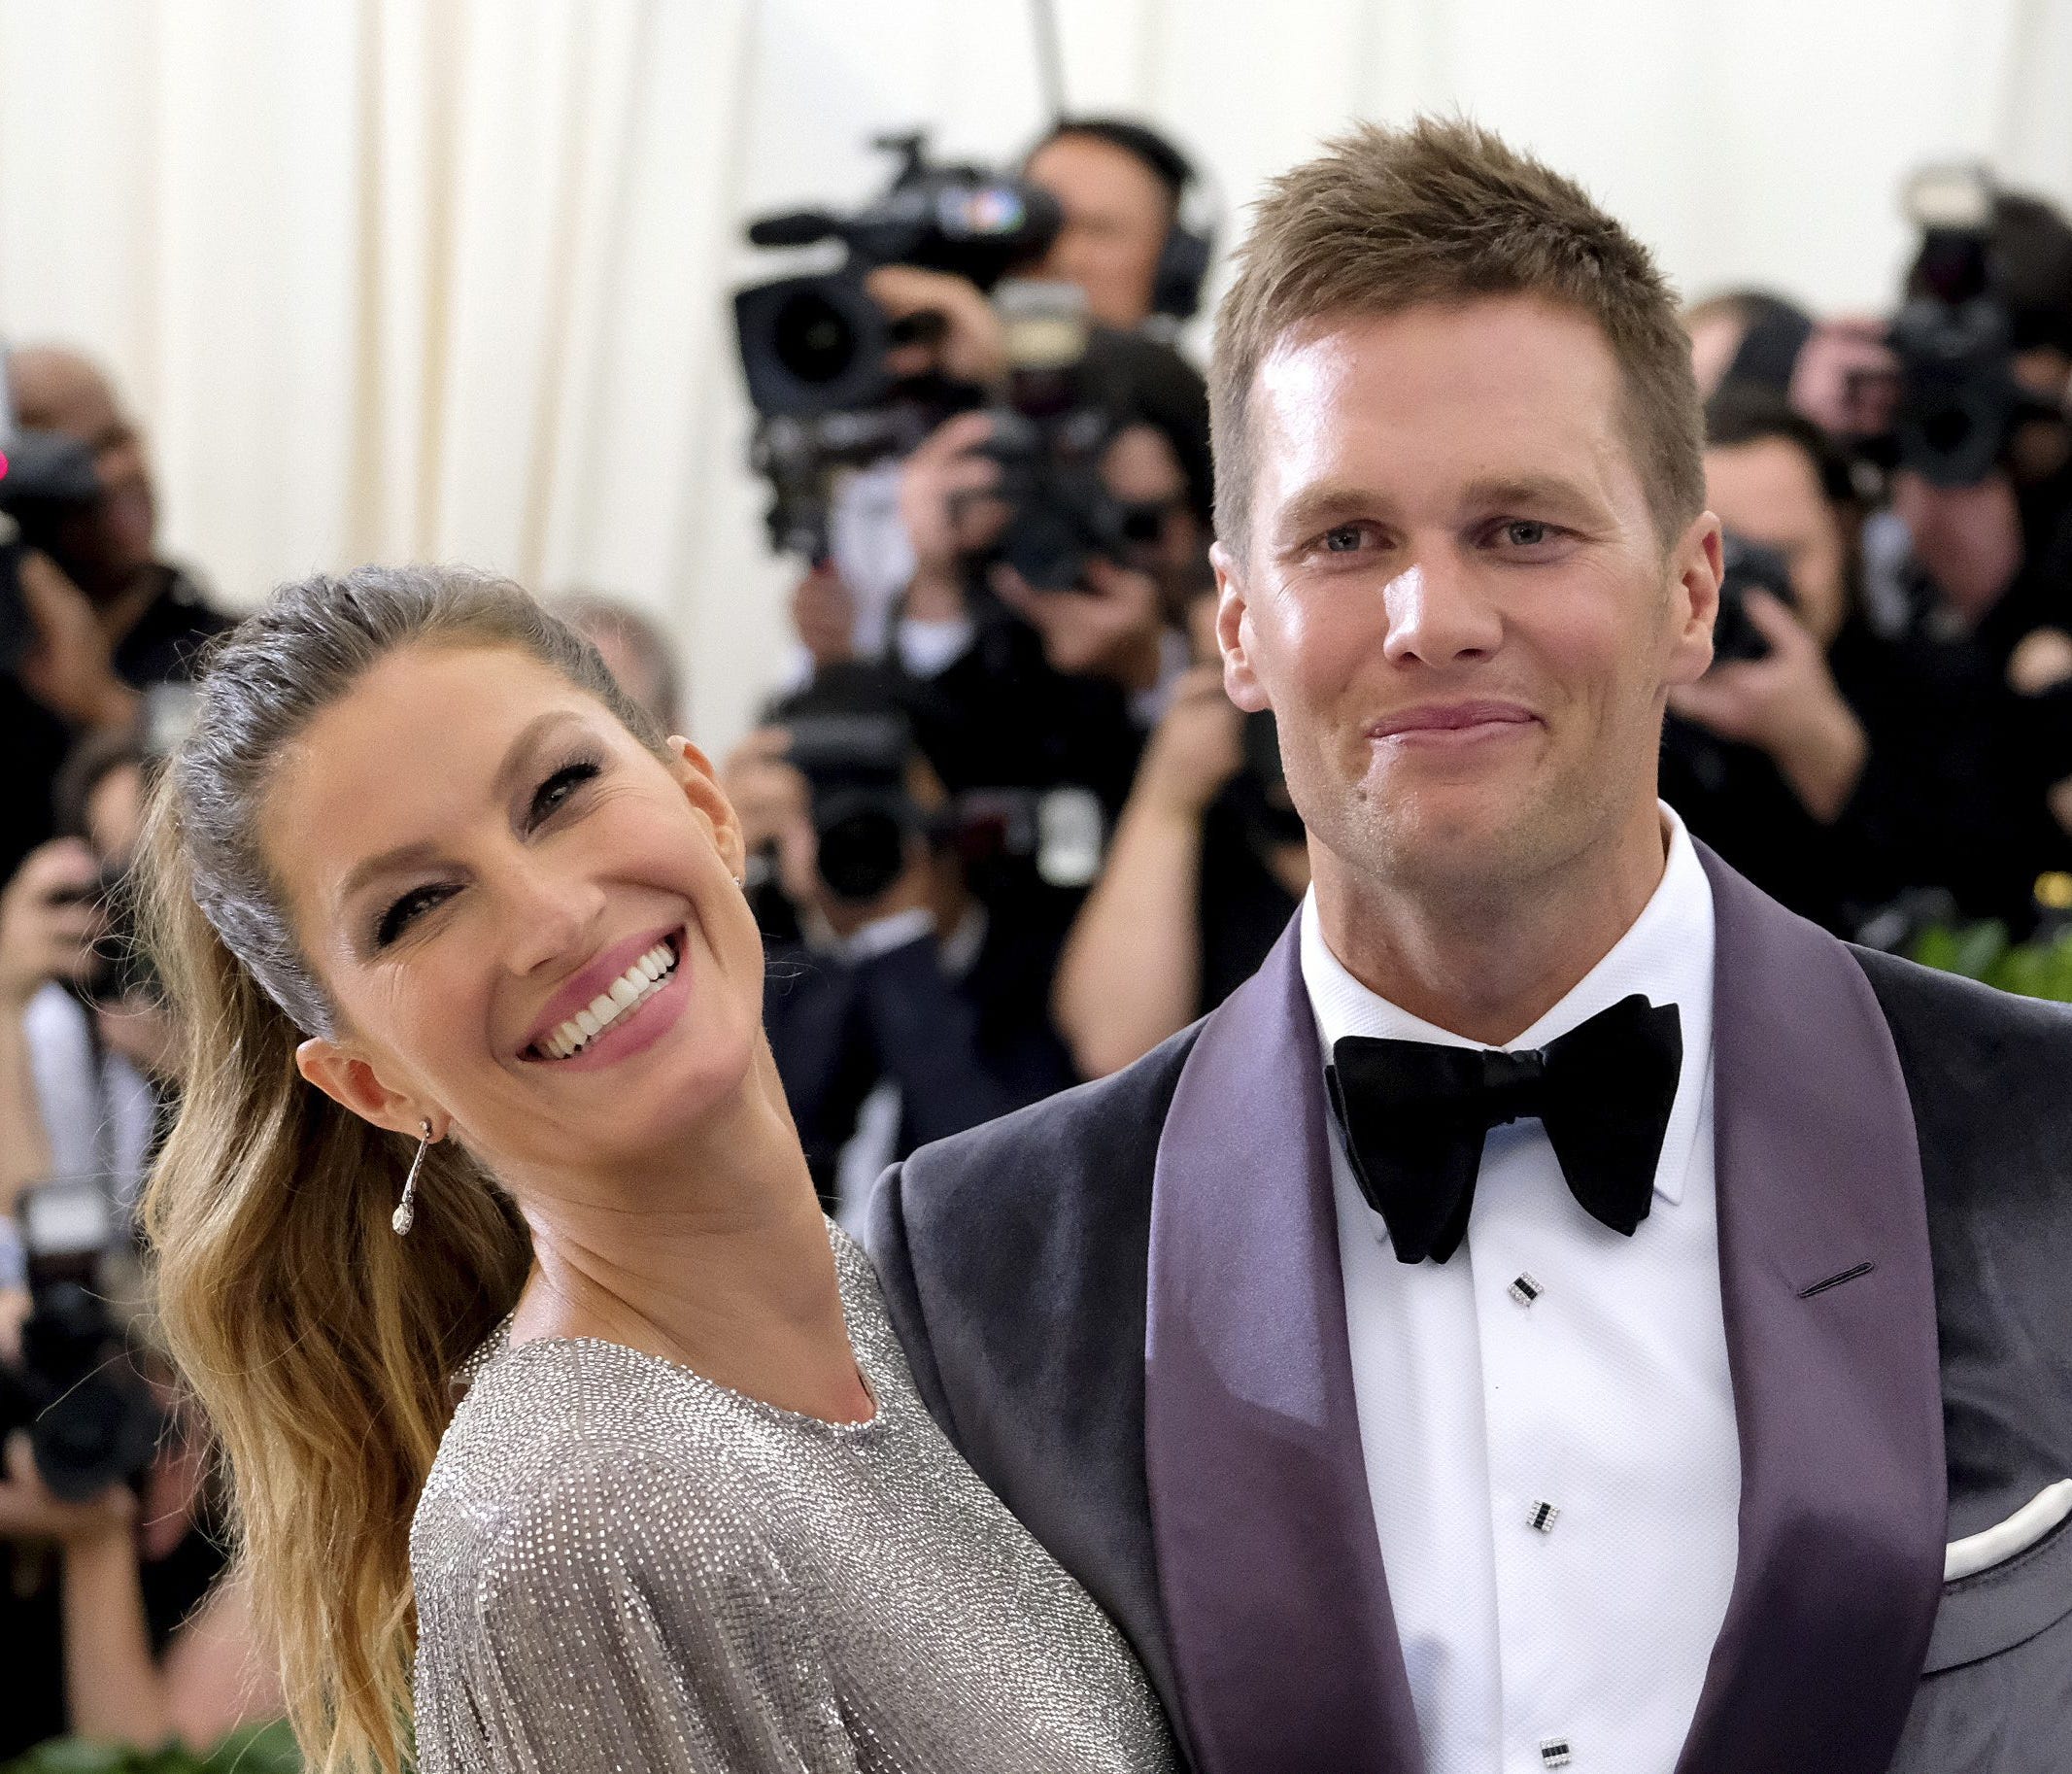 FILE - In this May 1, 2017, file photo, Gisele Bundchen, left, and Tom Brady attend The Metropolitan Museum of Art's Costume Institute benefit gala celebrating the opening of the Rei Kawakubo/Comme des Garçons: Art of the In-Between exhibition in New